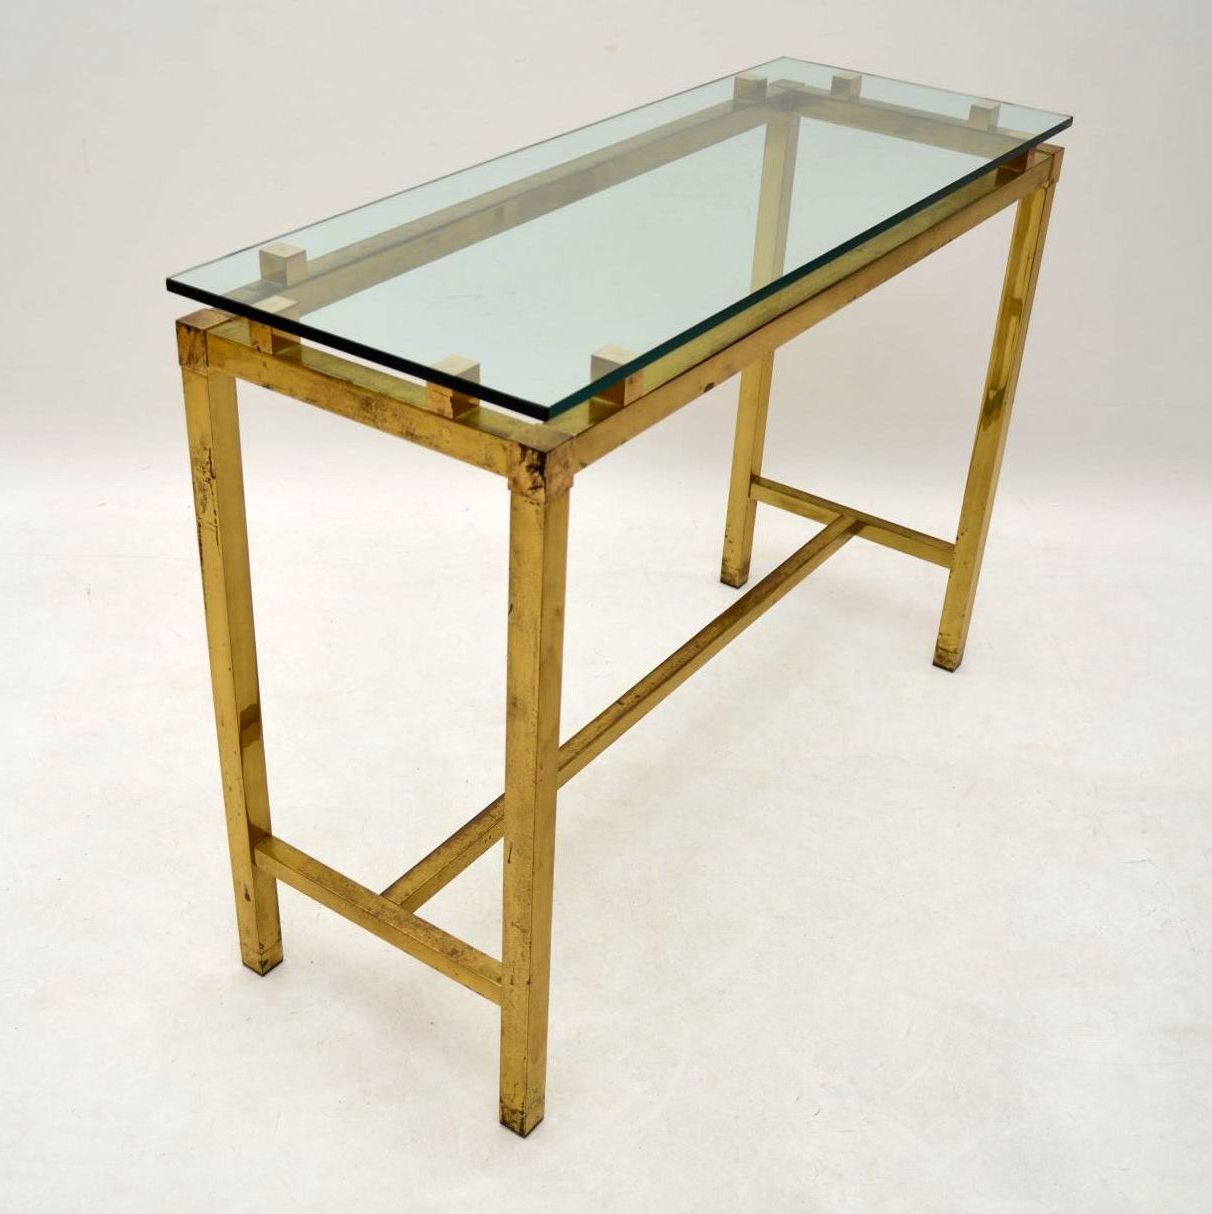 Antique Brass Aluminum Round Console Tables Within Trendy Retro Brass & Glass Console Table Vintage 1970's (View 4 of 10)